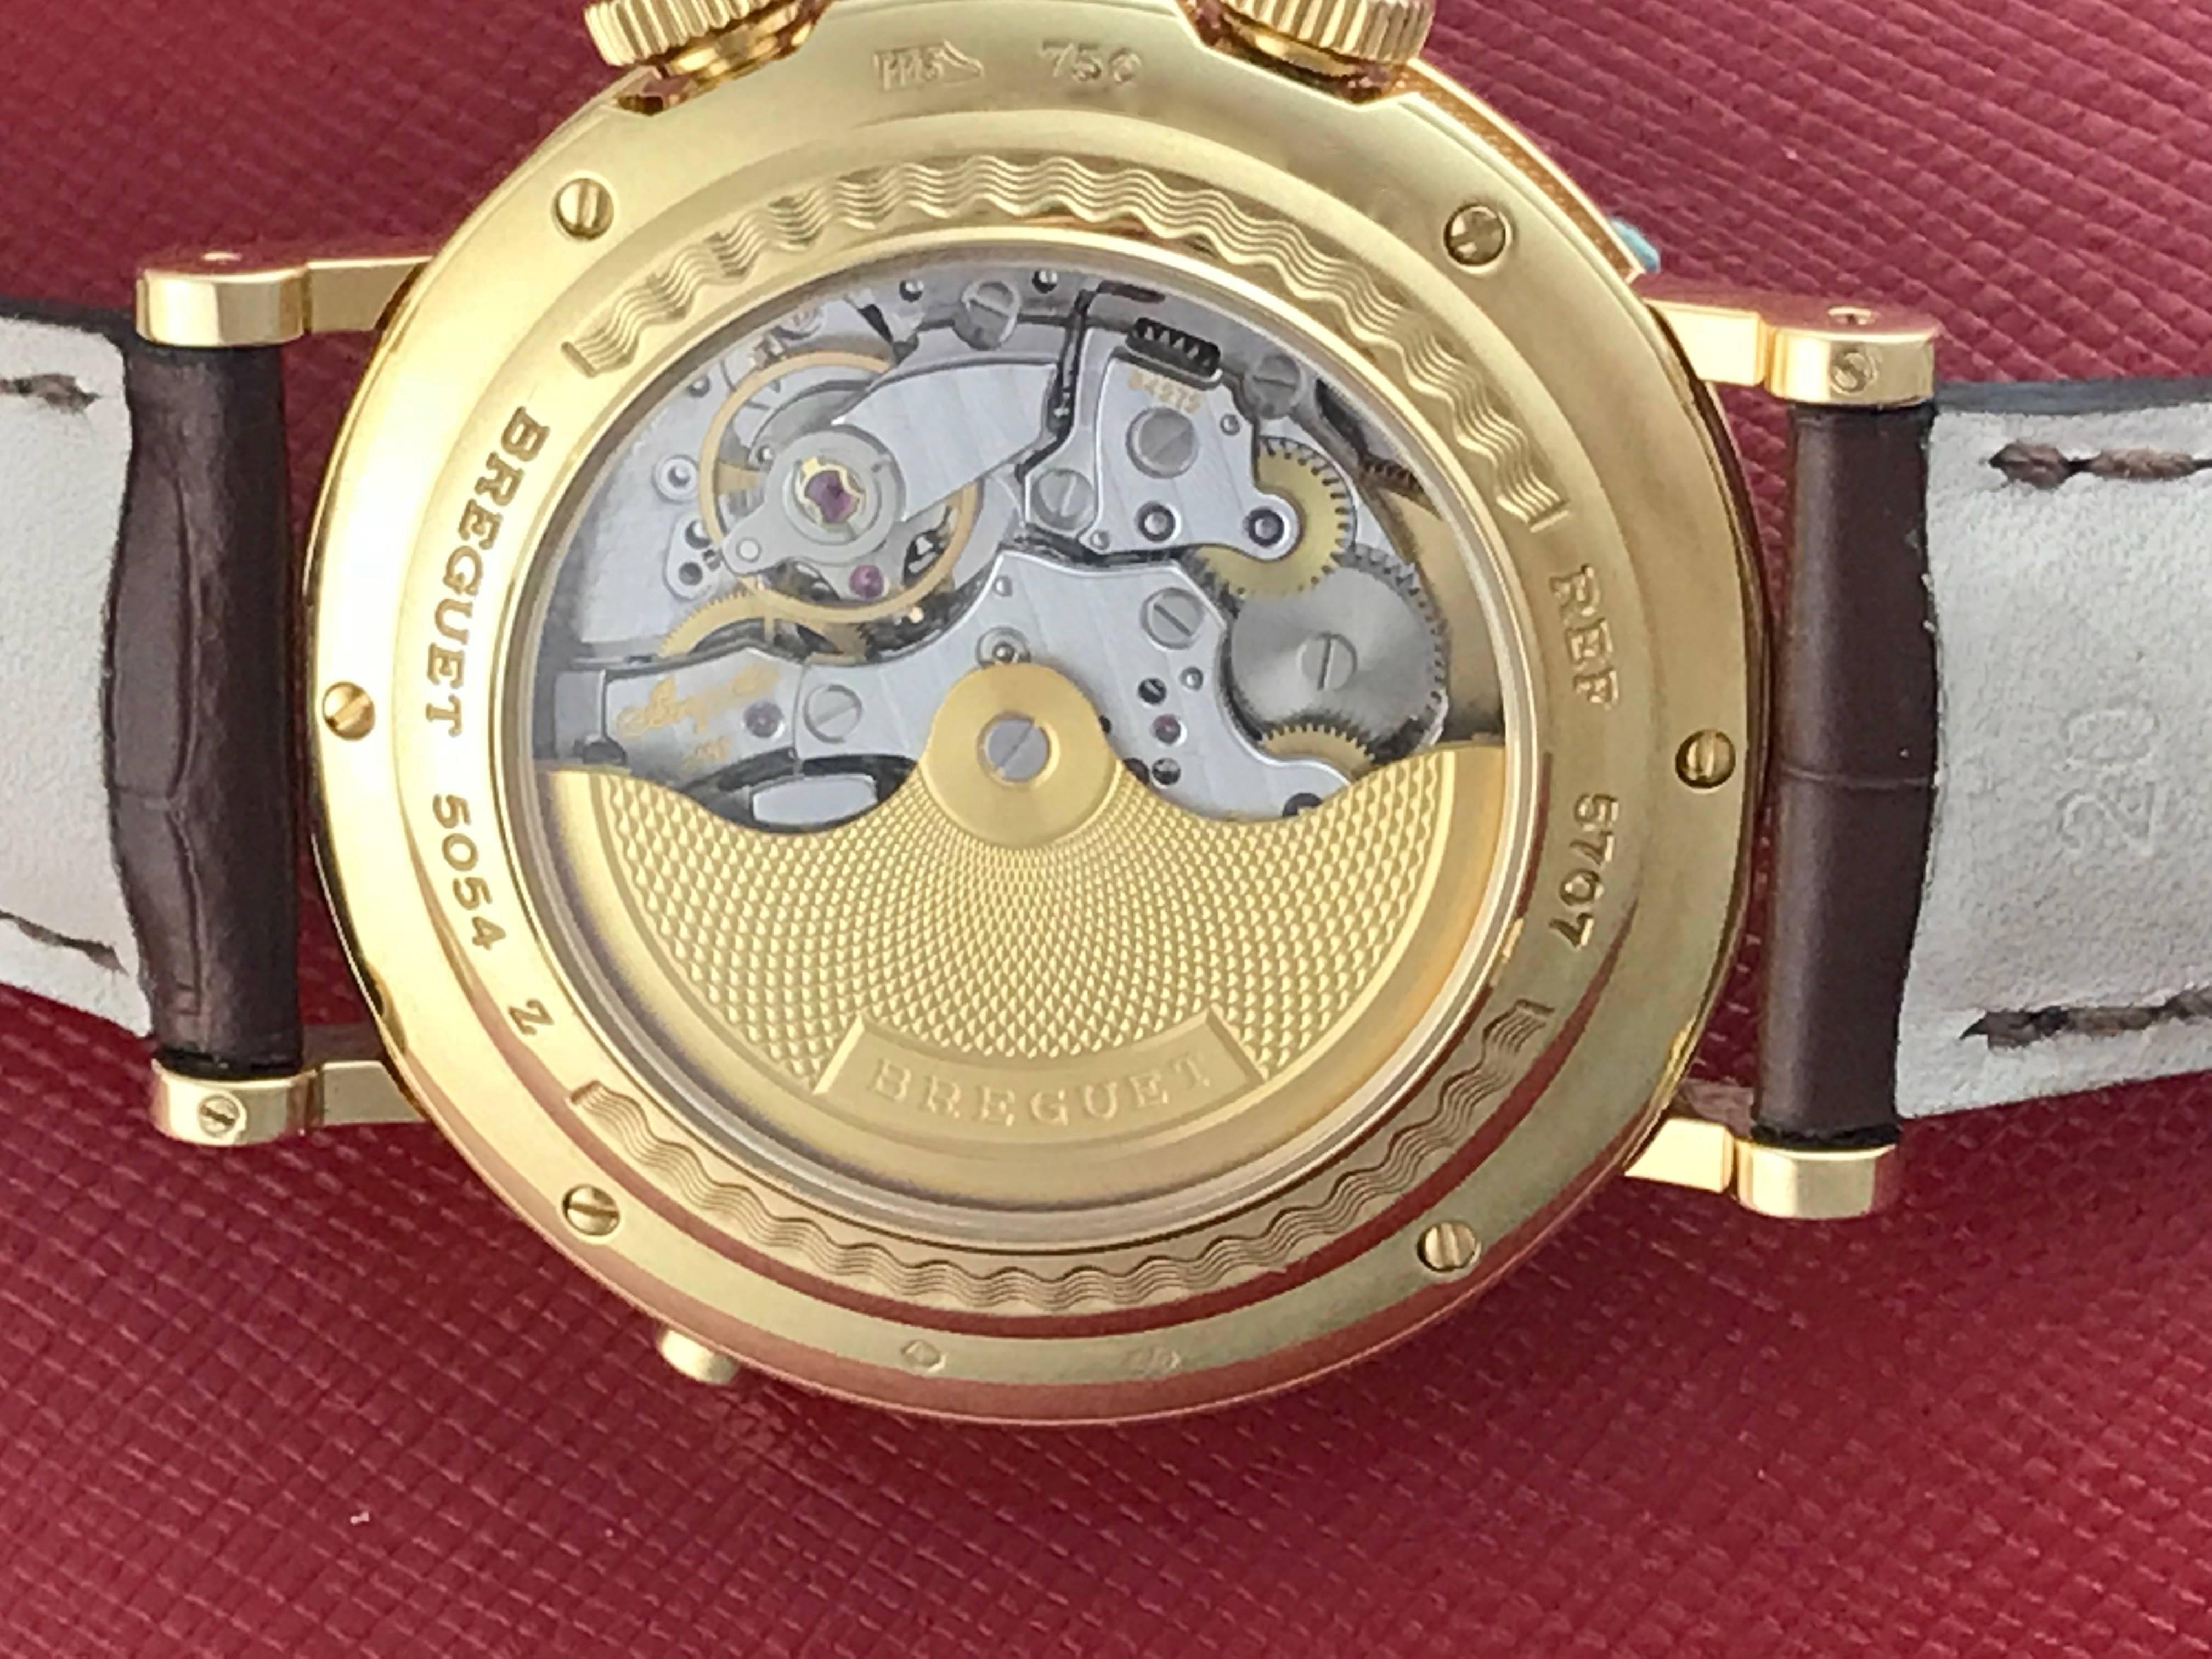 Breguet Yellow Gold Classique GMT Alarm Power Reserve Automatic Wristwatch In Excellent Condition For Sale In Dallas, TX